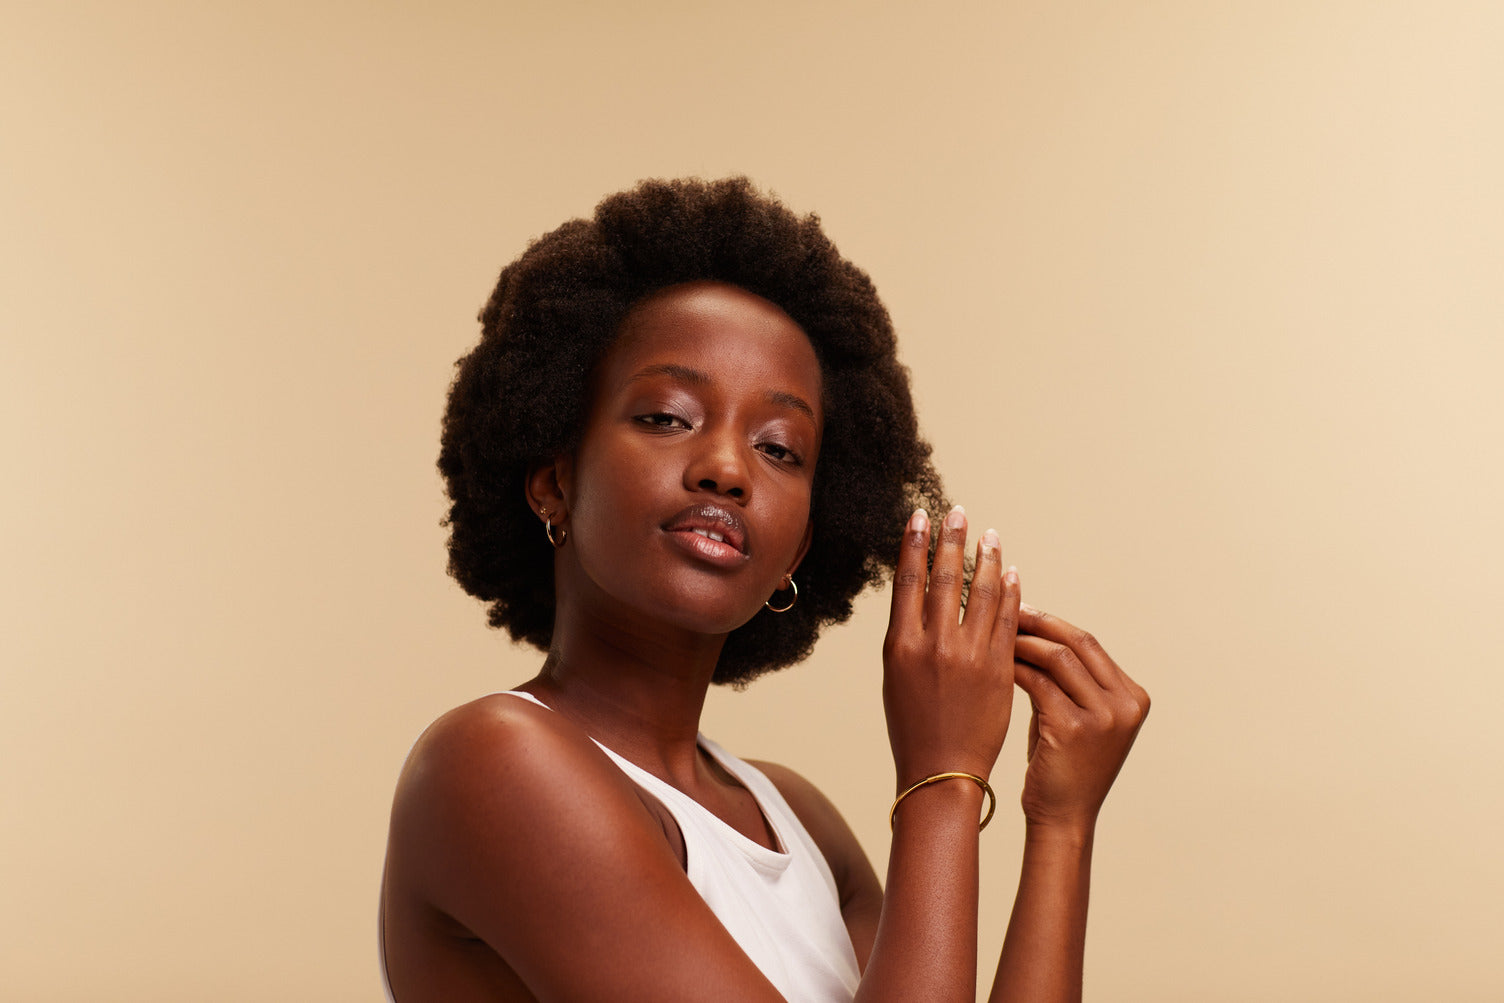 5-step hair care routine for curly, coily and Afro hair